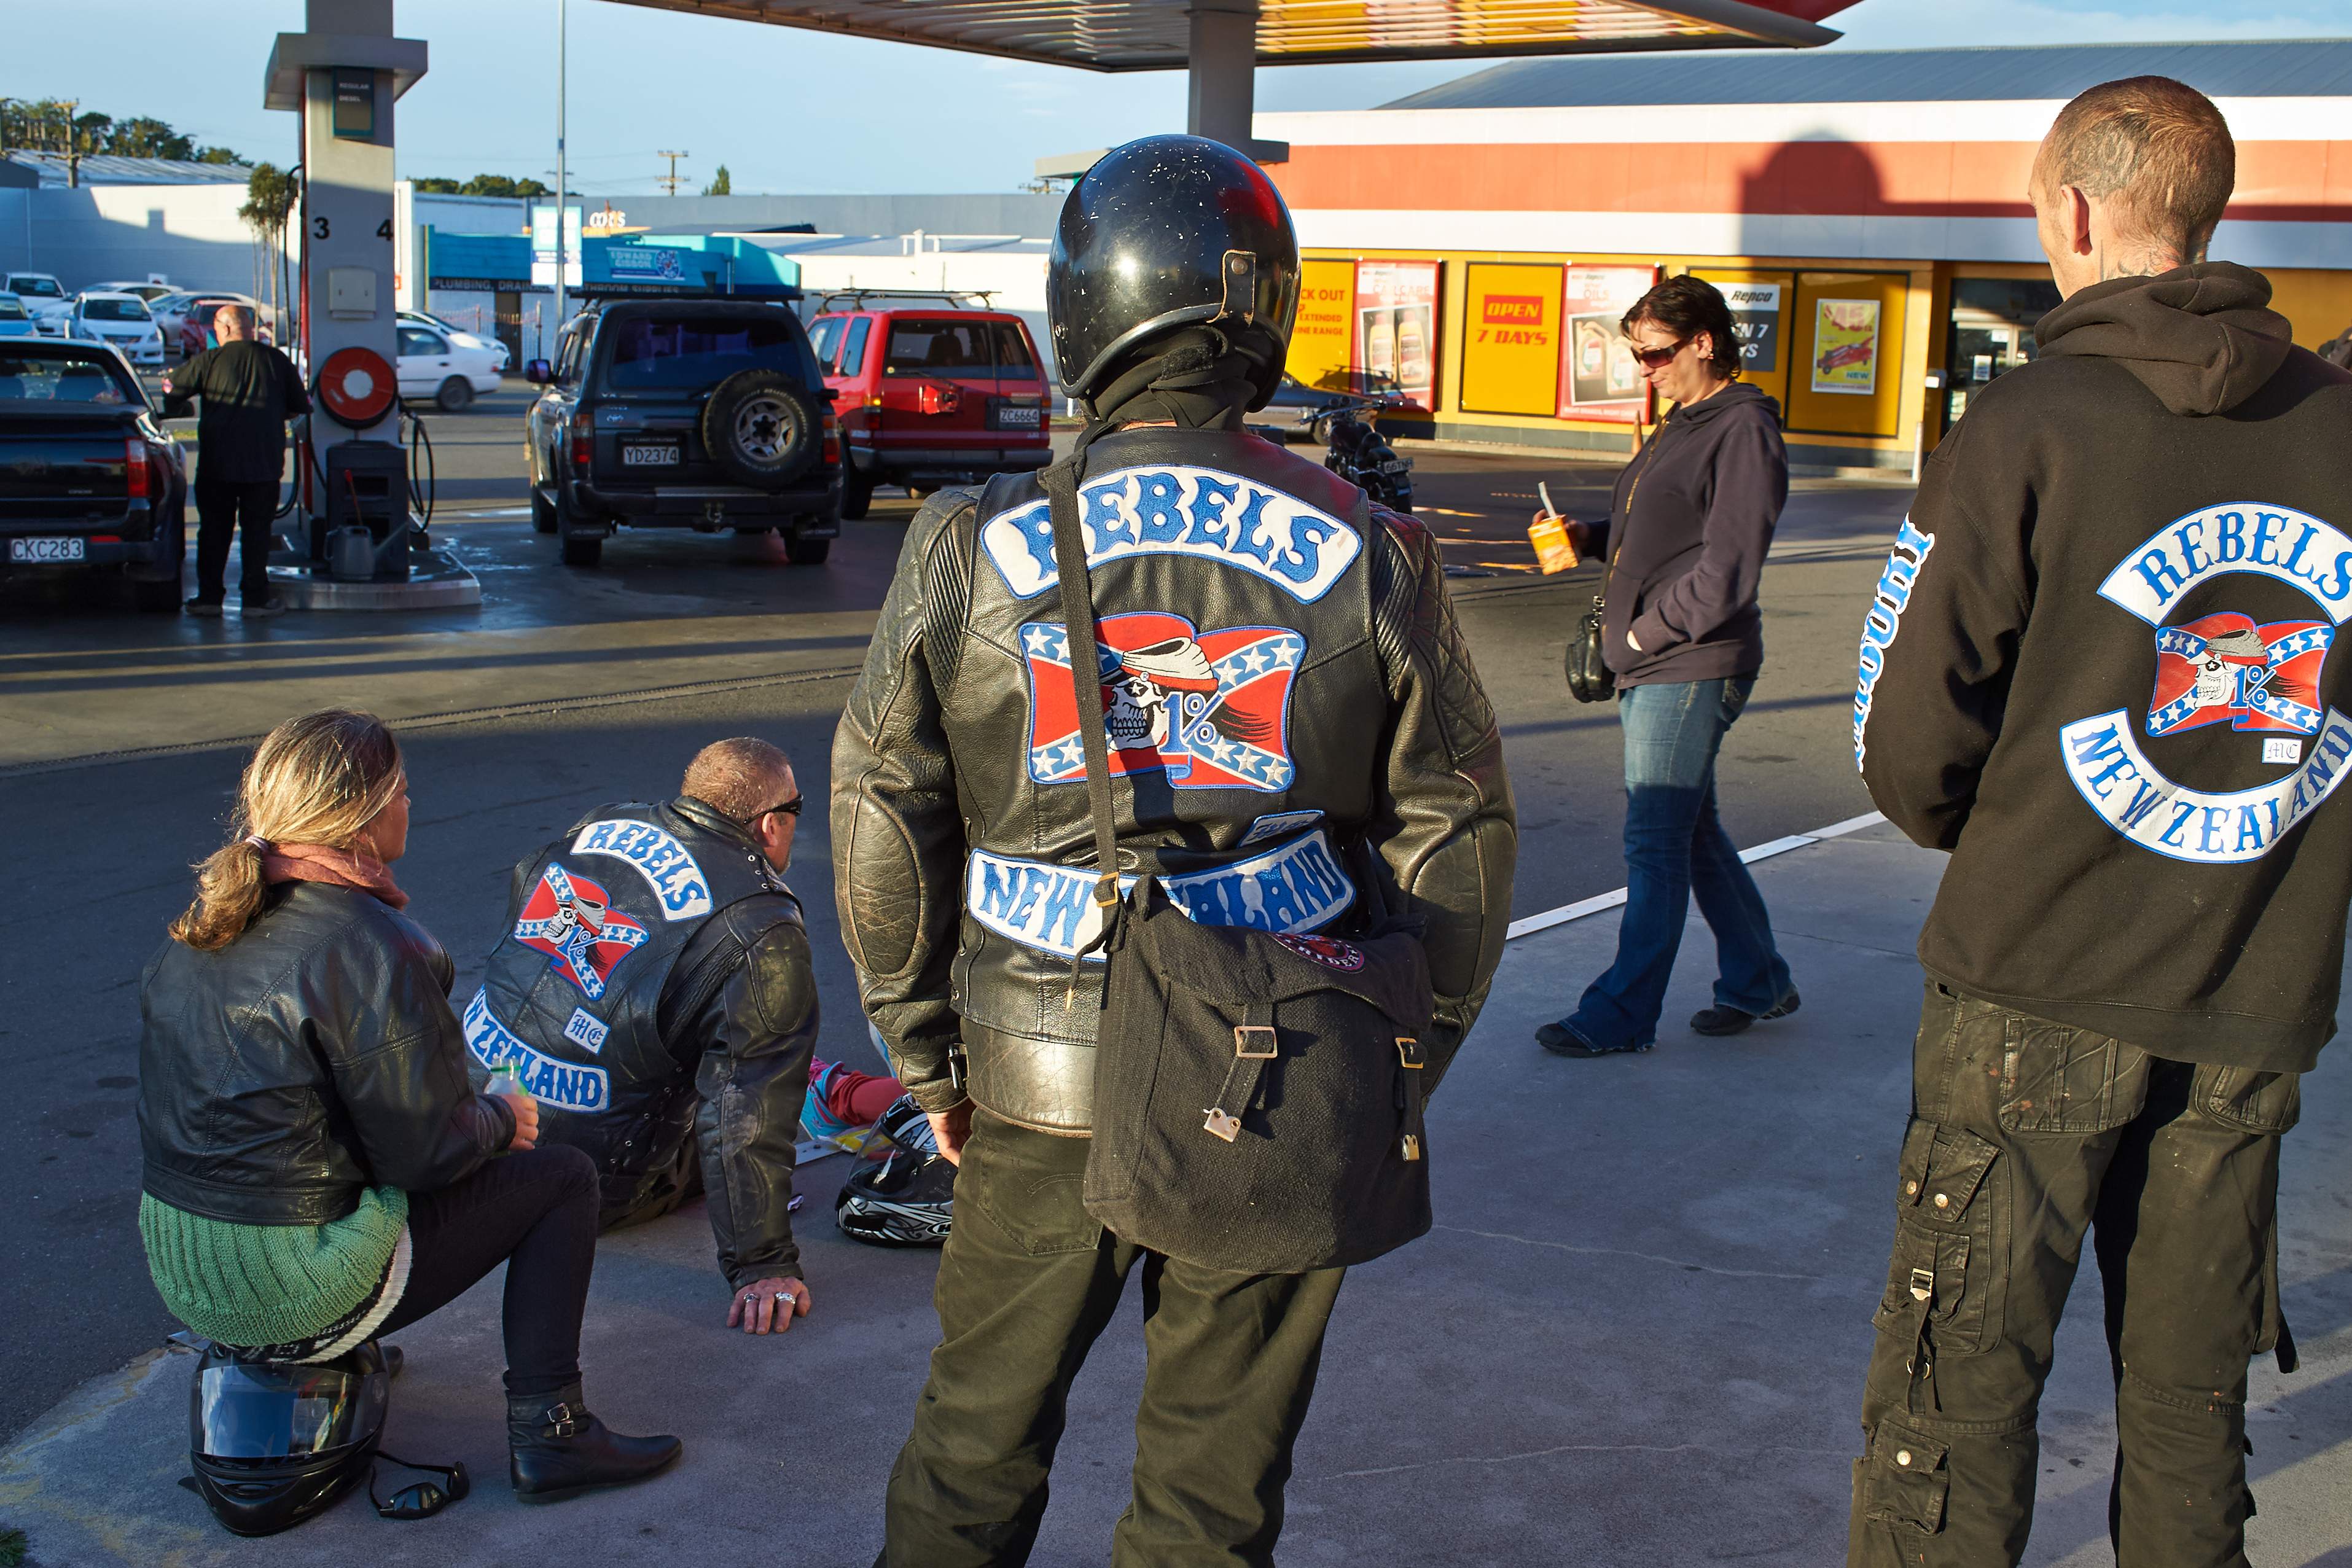 Three Rebels Outlaw Motorcycle Gang members charged following alleged ...